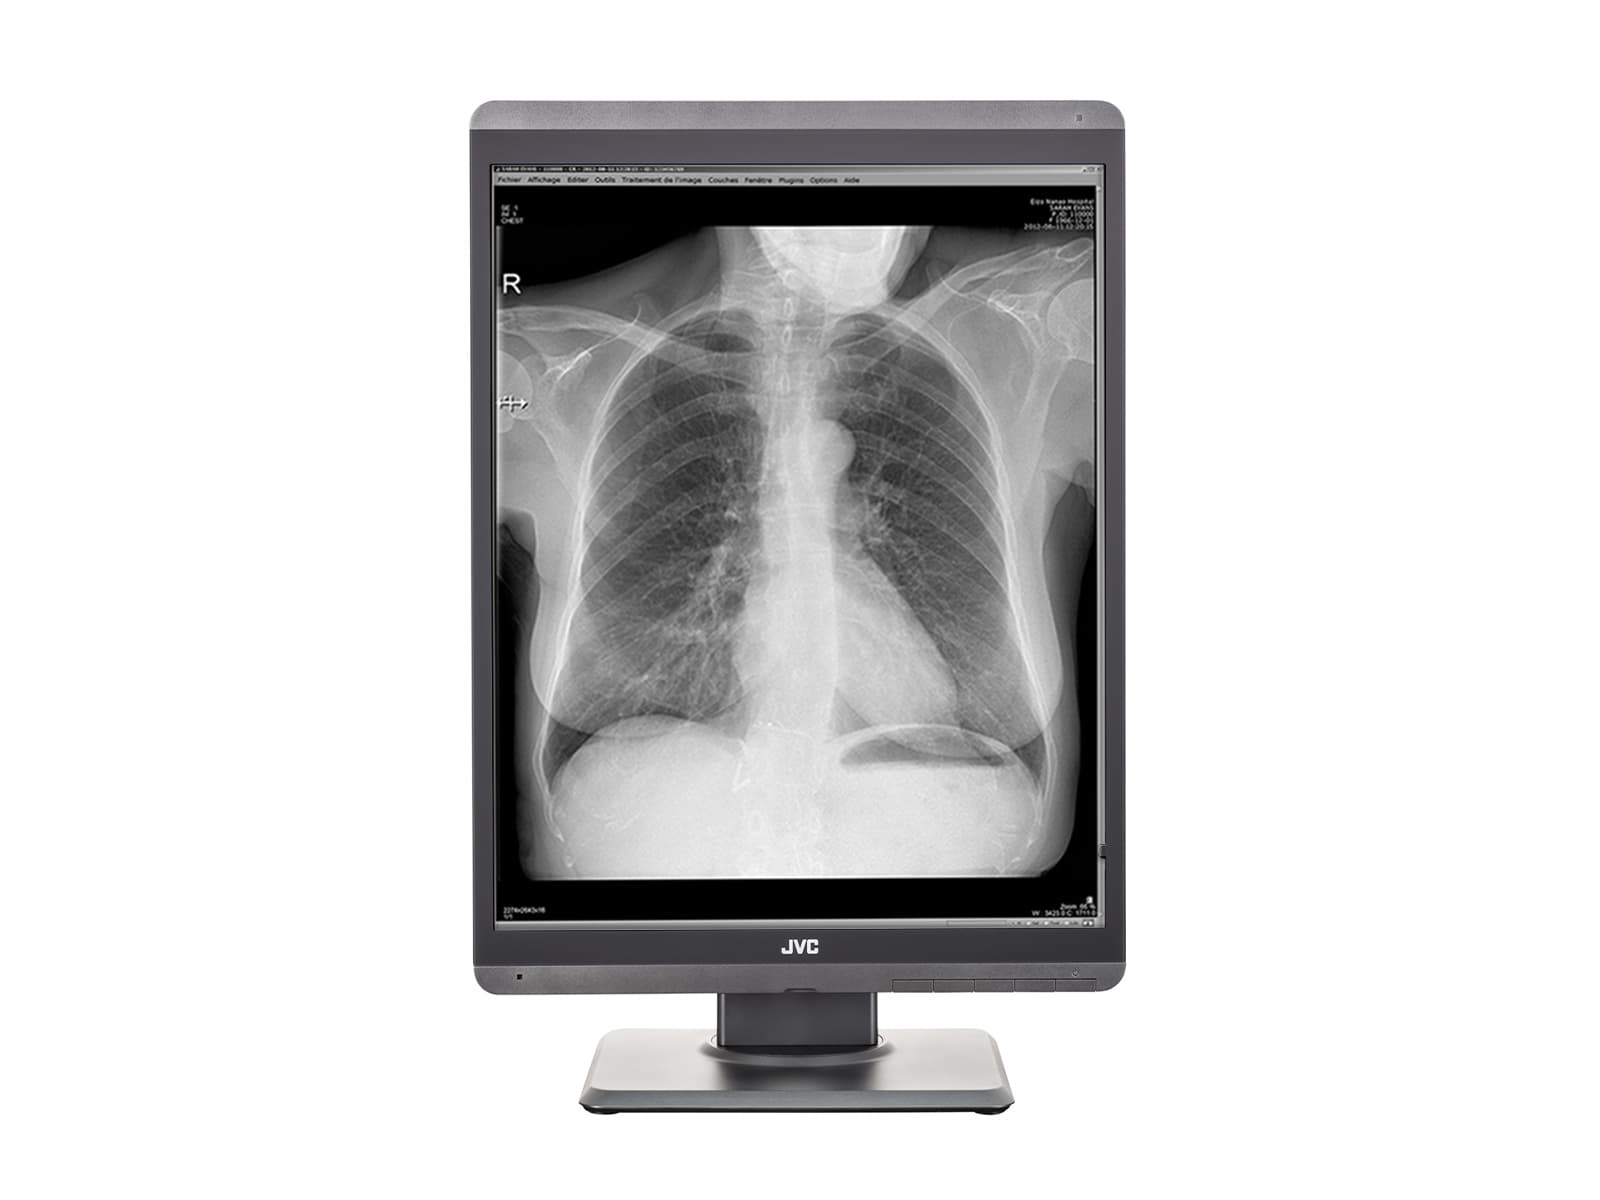 JVC Totoku MS-S300 3MP 21" LED Grayscale General Radiology Diagnostic Display Monitor (MS-S300) Monitors.com 